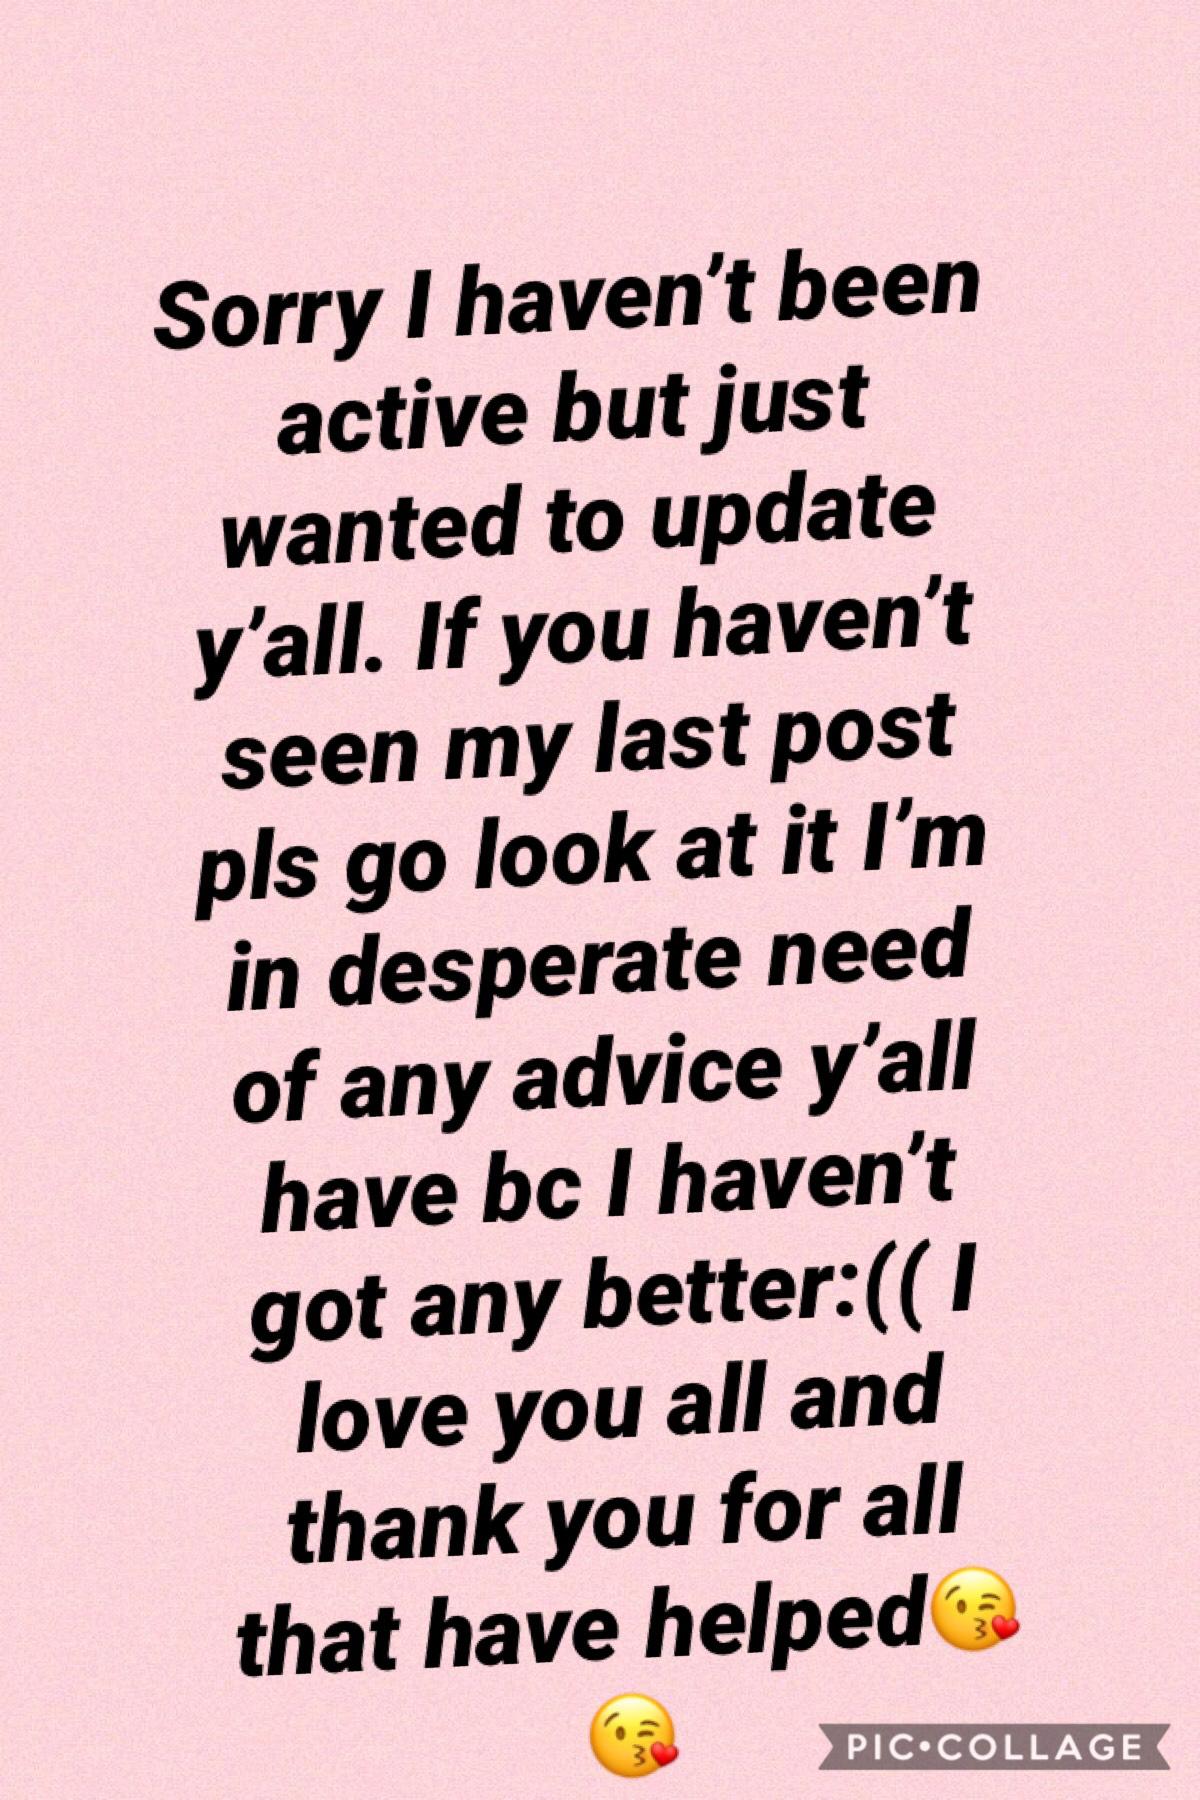 Pls pls help y’all! I’m trying to get better but it’s not working:(((